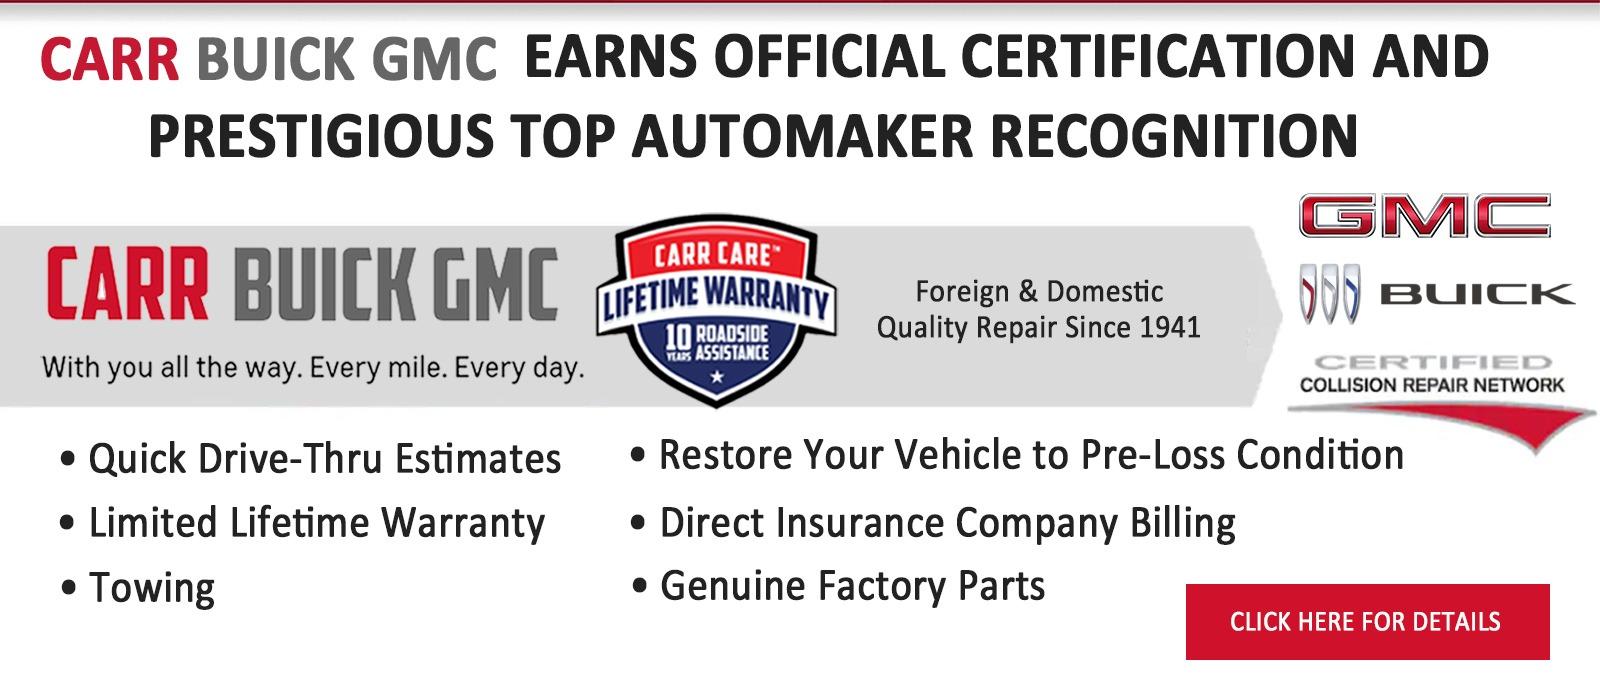 Car Buick Gmc Earns Official Certification and Prestigious Top Automaker Recognition